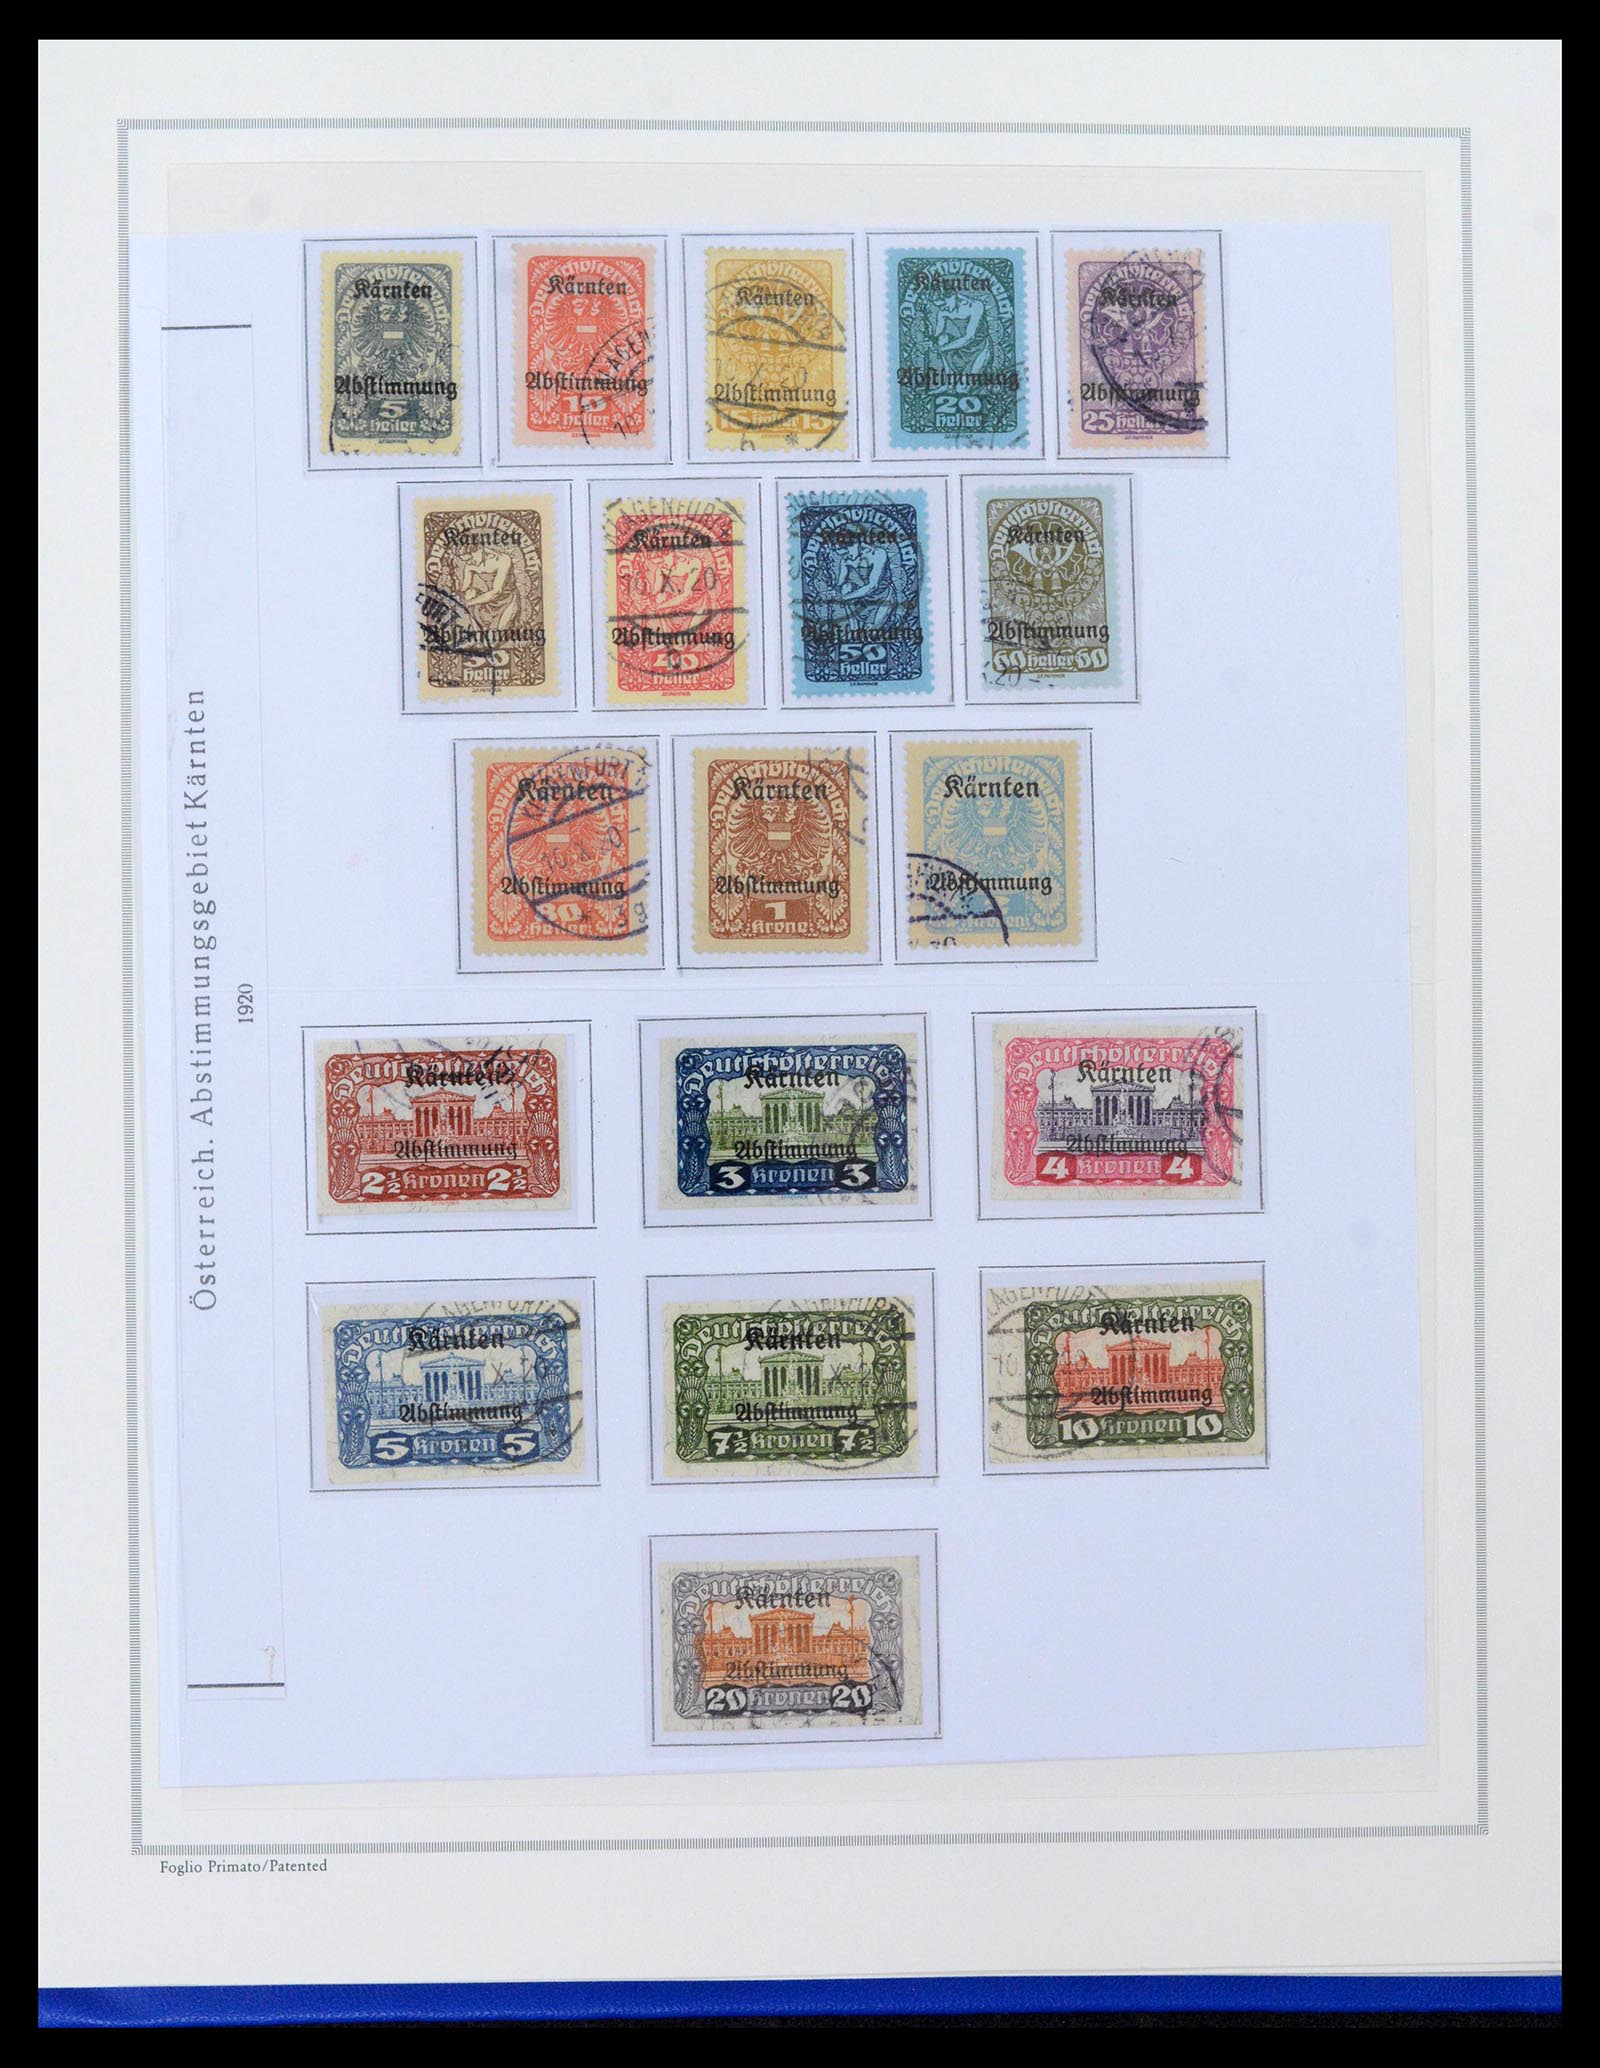 39038 0021 - Stamp collection 39038 Austria 1850-1950.